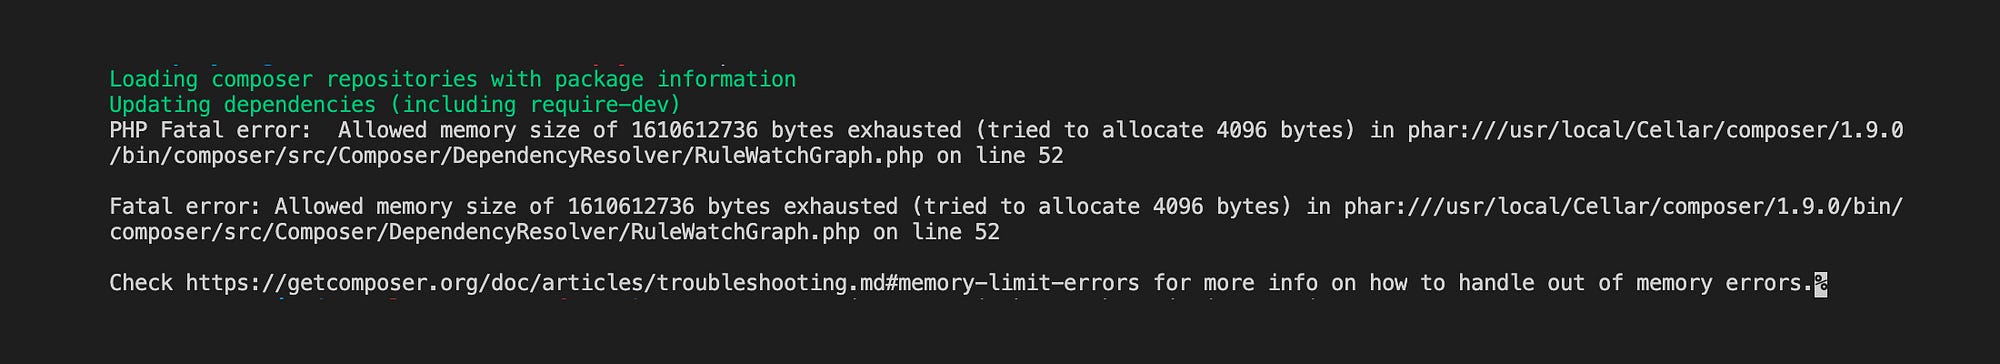 Composer Update PHP Fatal error: Allowed memory size of … byte exhausted |  by Kuncoro Wicaksono | Medium